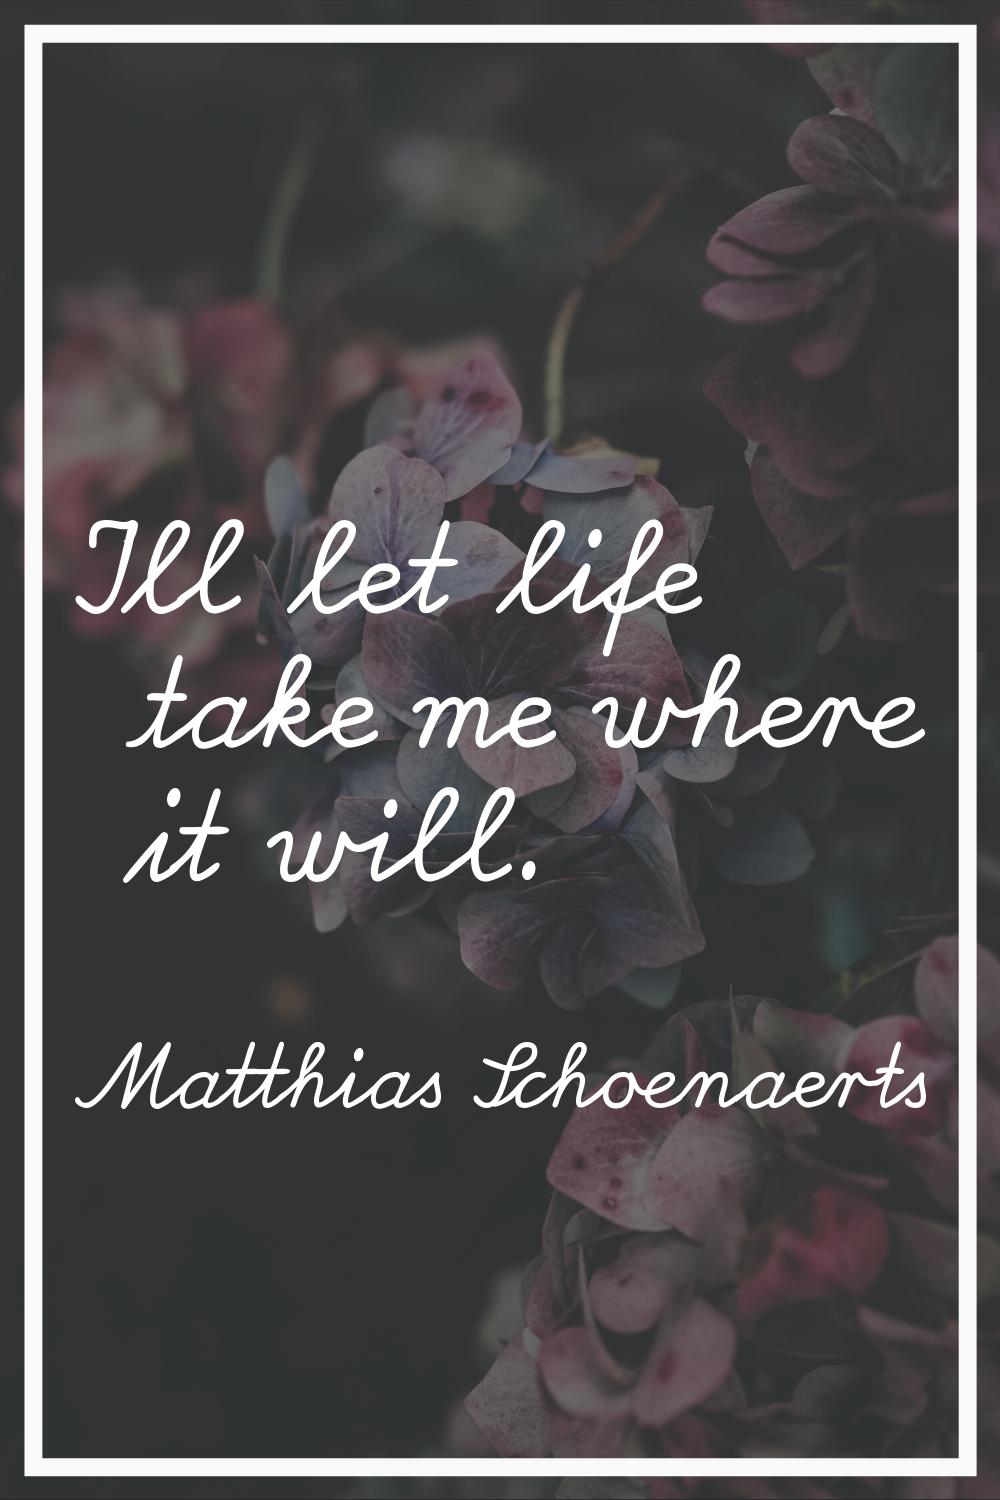 I'll let life take me where it will.